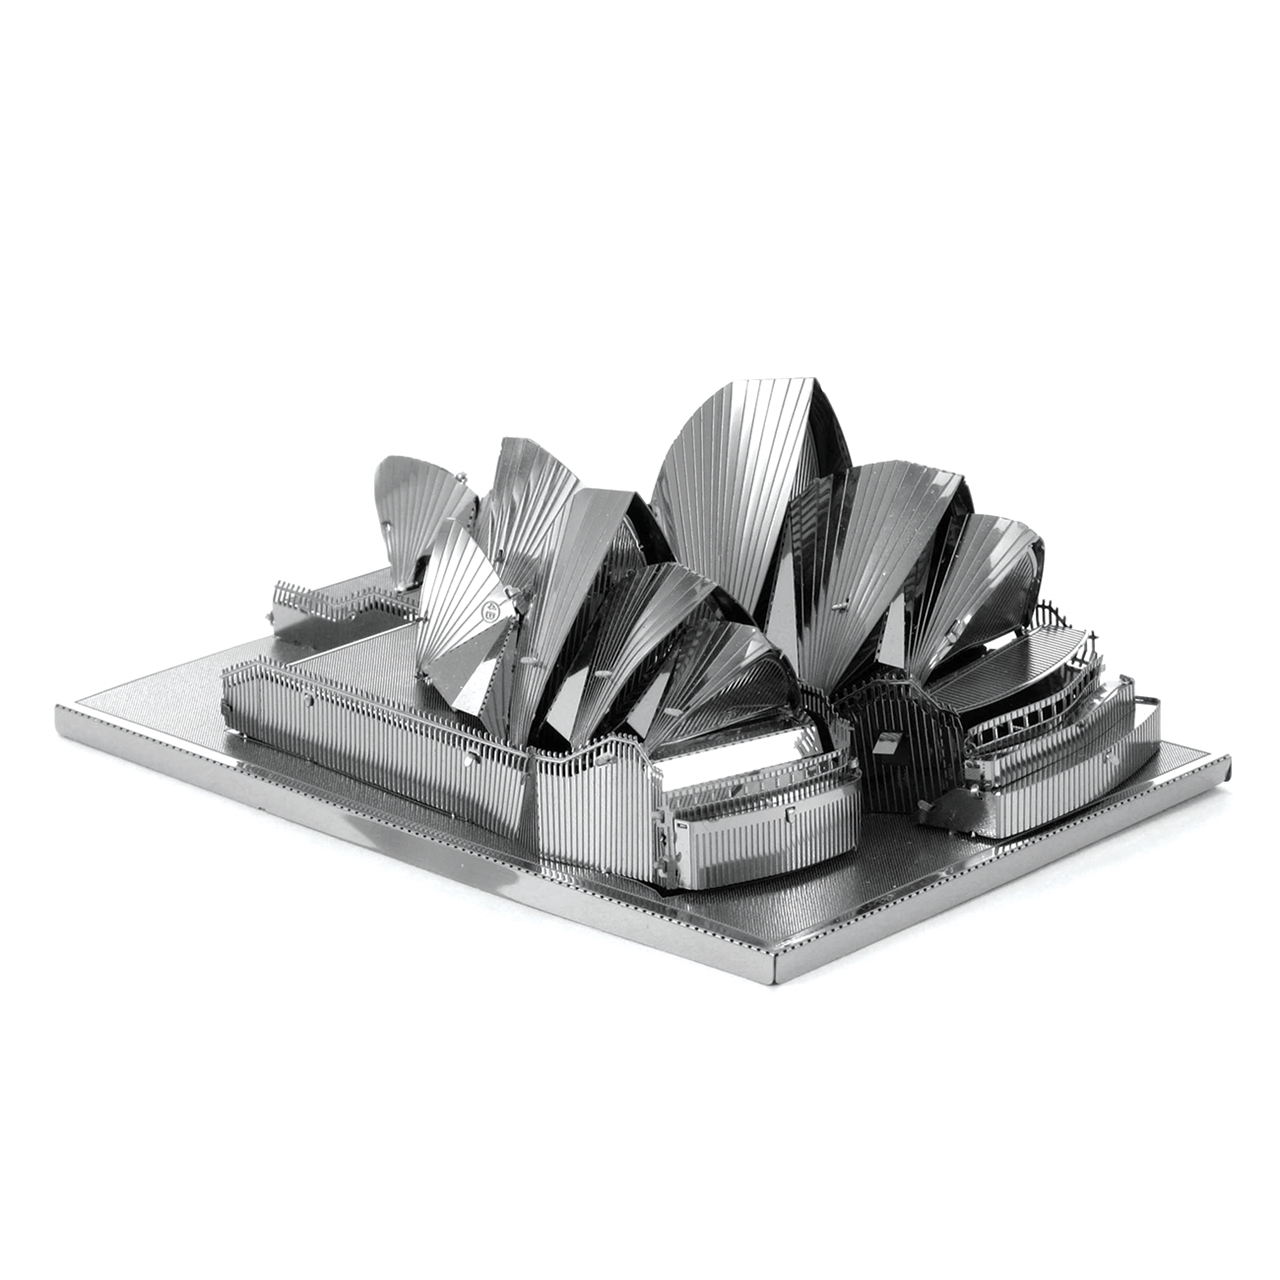 Metal Earth Sydney Opera House Construction Models Craft Metal Earth The Games Shop Board Games Card Games Jigsaws Puzzles Collectables Australia